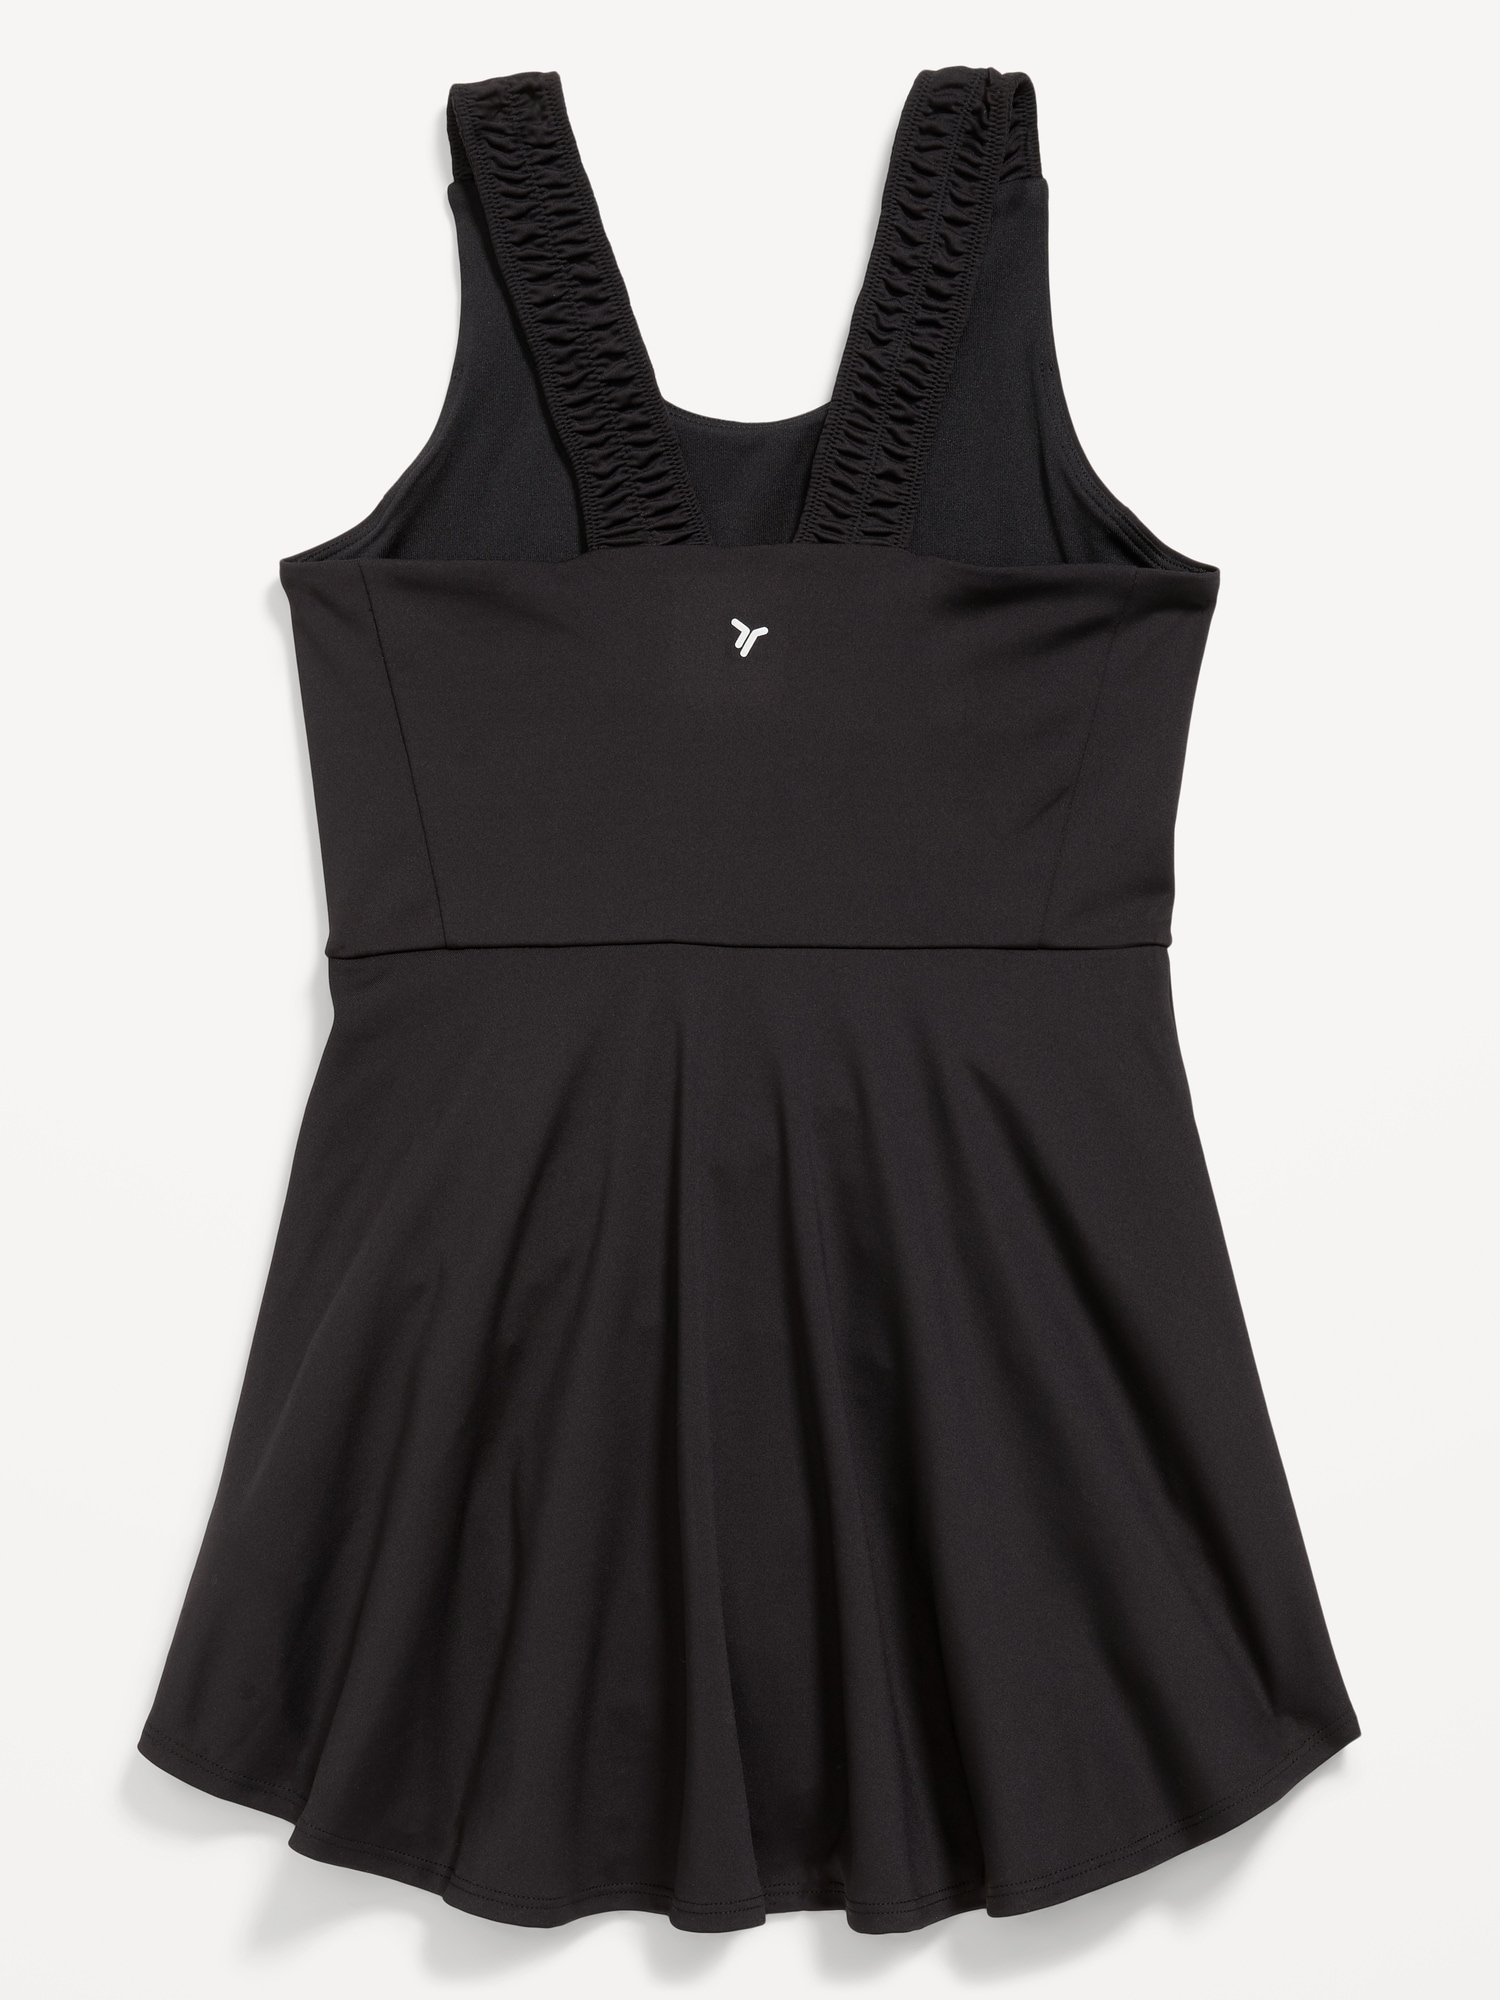 PowerSoft Sleeveless Athletic Dress for Girls | Old Navy